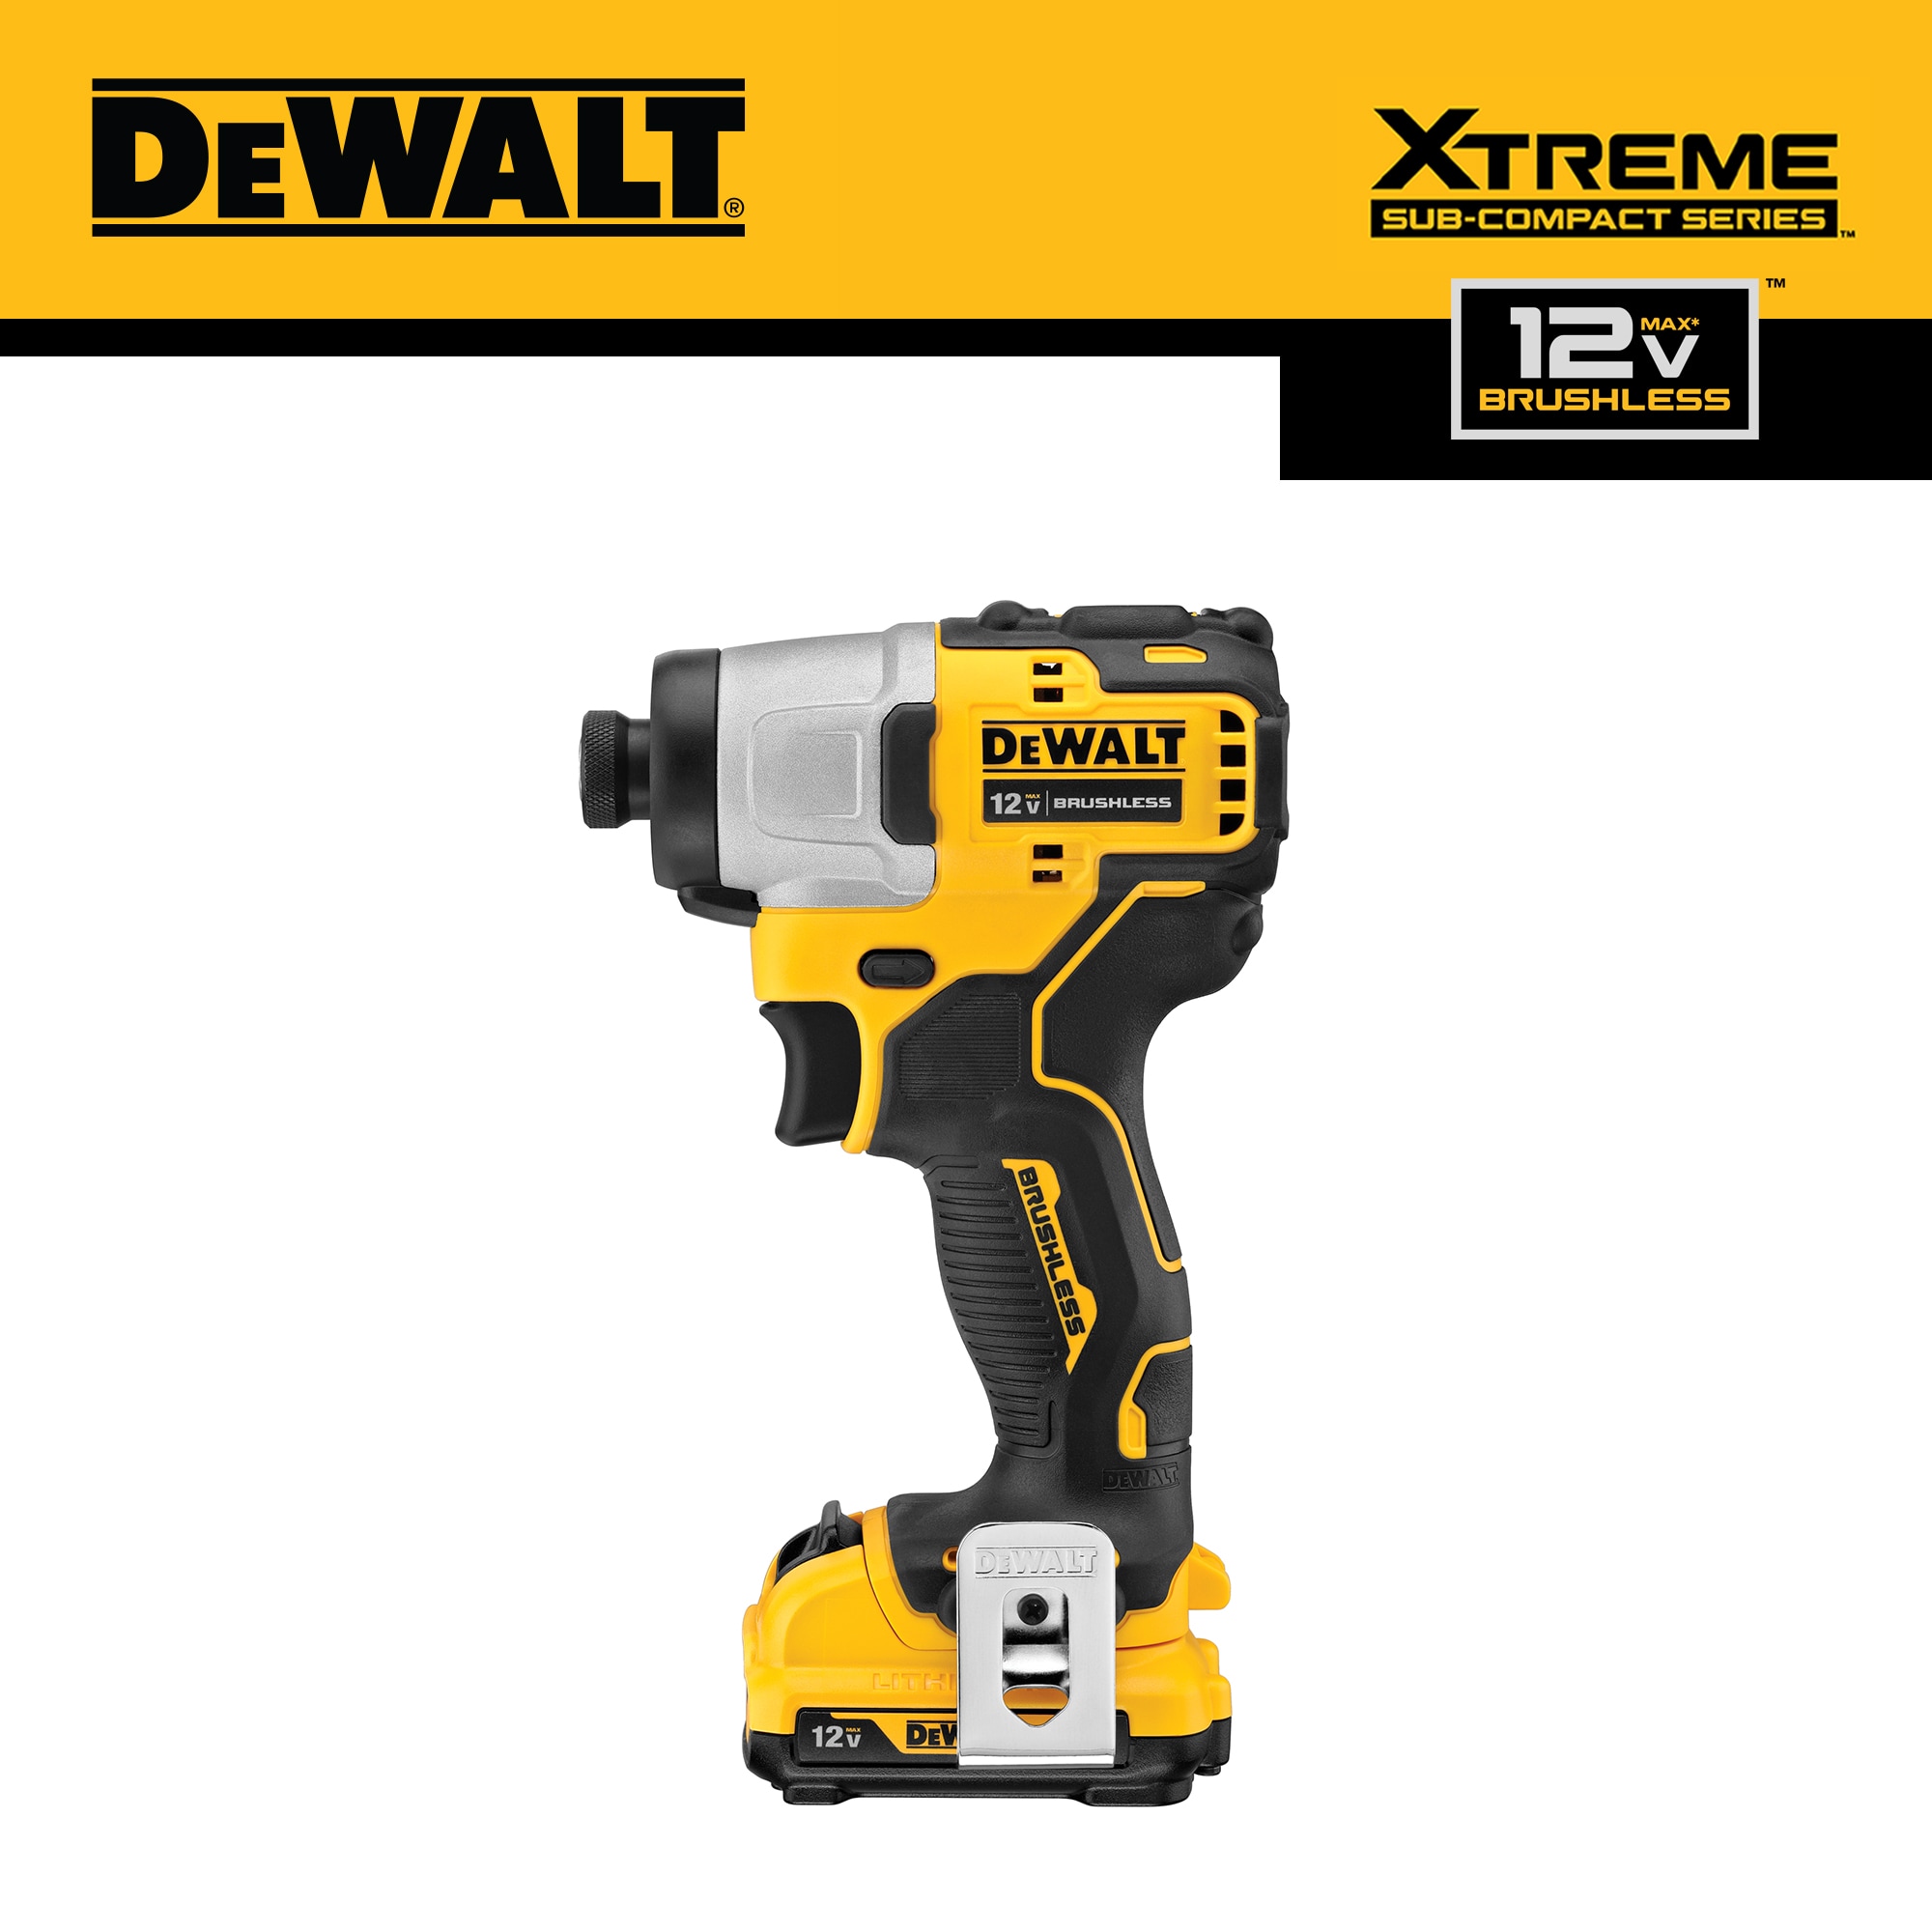 DEWALT XTREME 12-volt Max 1/4-in Brushless Cordless Impact Driver  (2-Batteries Included, Charger Included and Soft Bag included) at